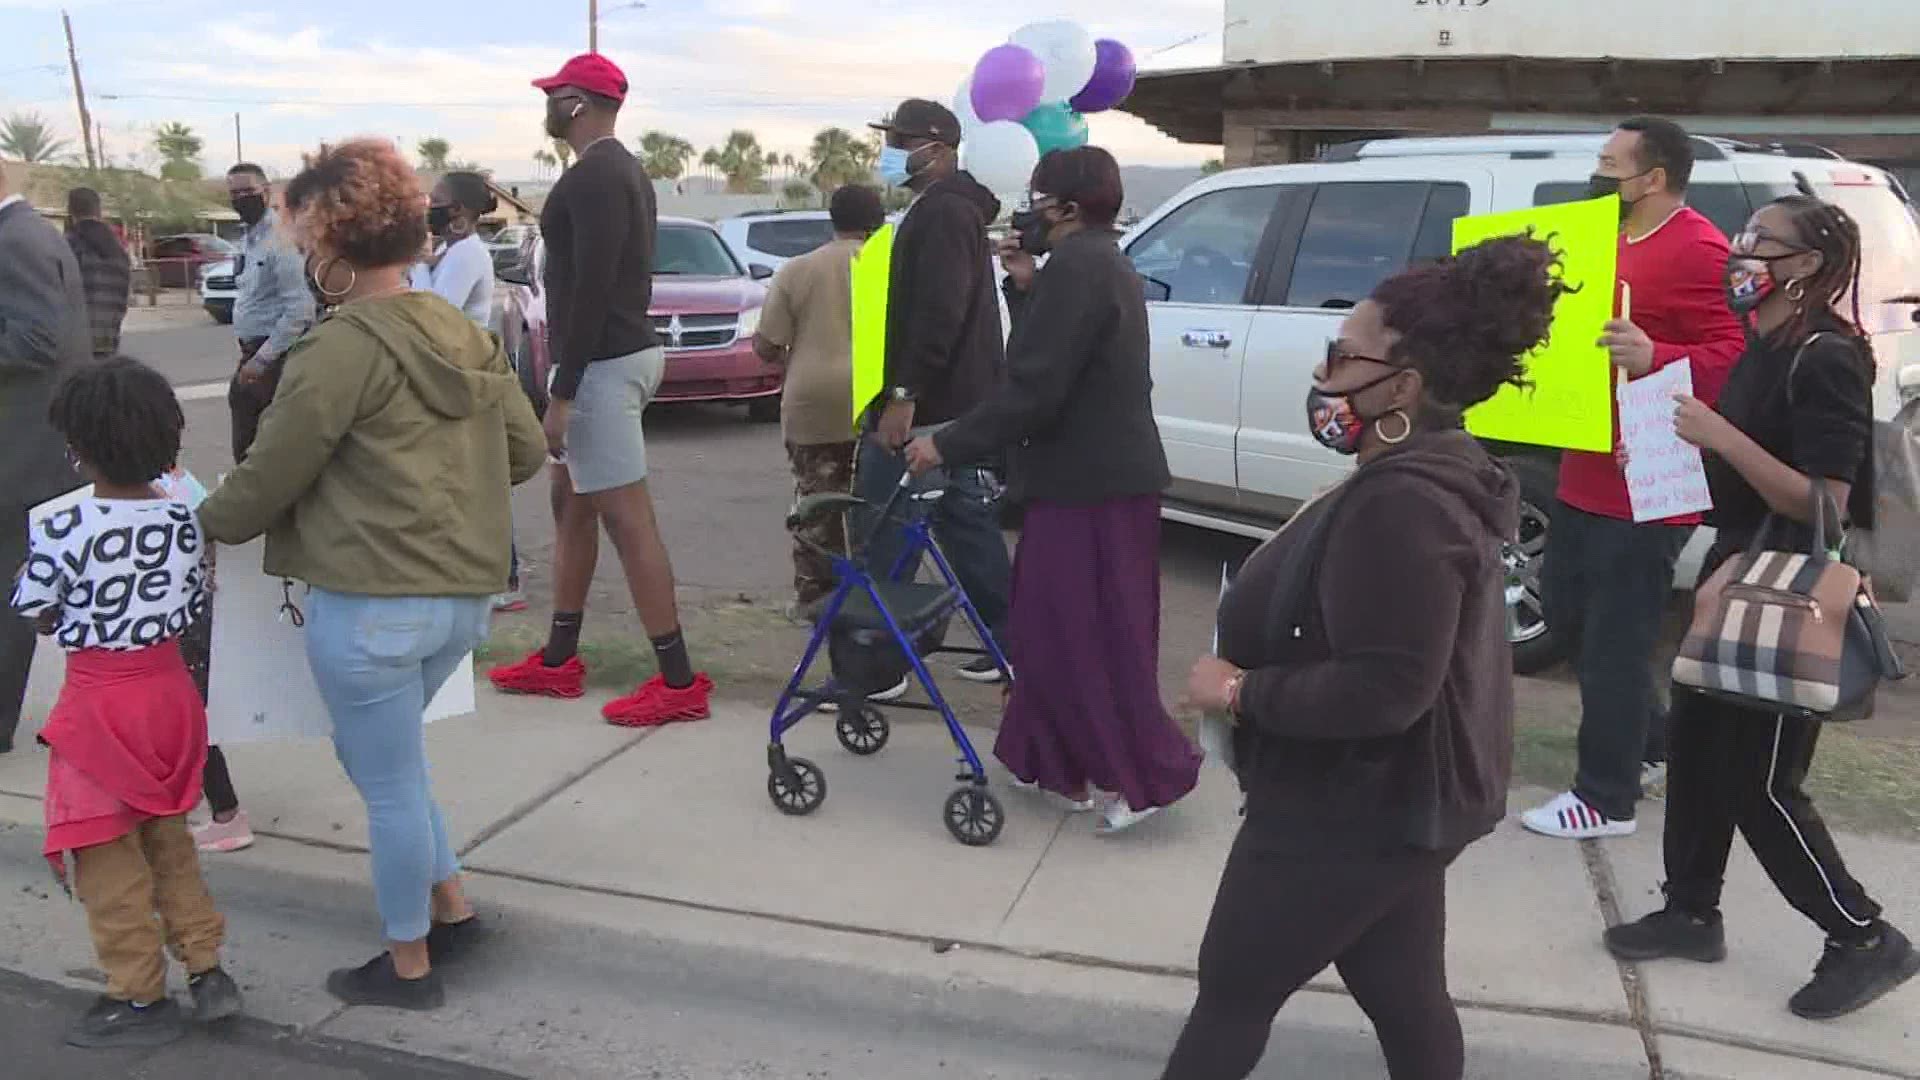 After two different pedestrian deaths in south Phoenix, the community is demanding action. They want the city to put in more crosswalks across south Phoenix.